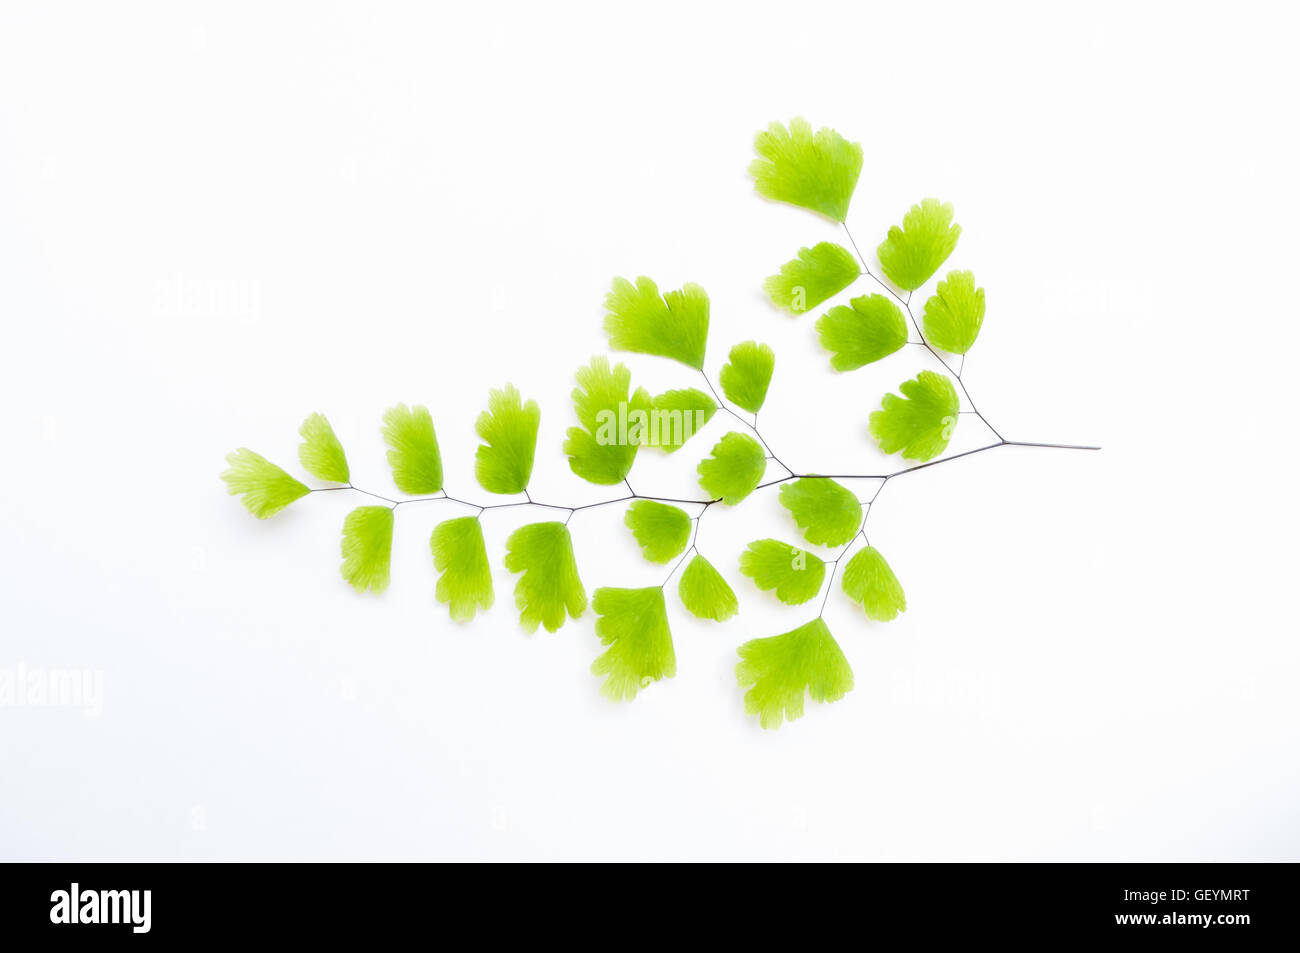 Maidenhair fern (Adiantum sp.) leaves on white background with soft shadow. It is used in herbal medicine as tea or syrup, for i Stock Photo